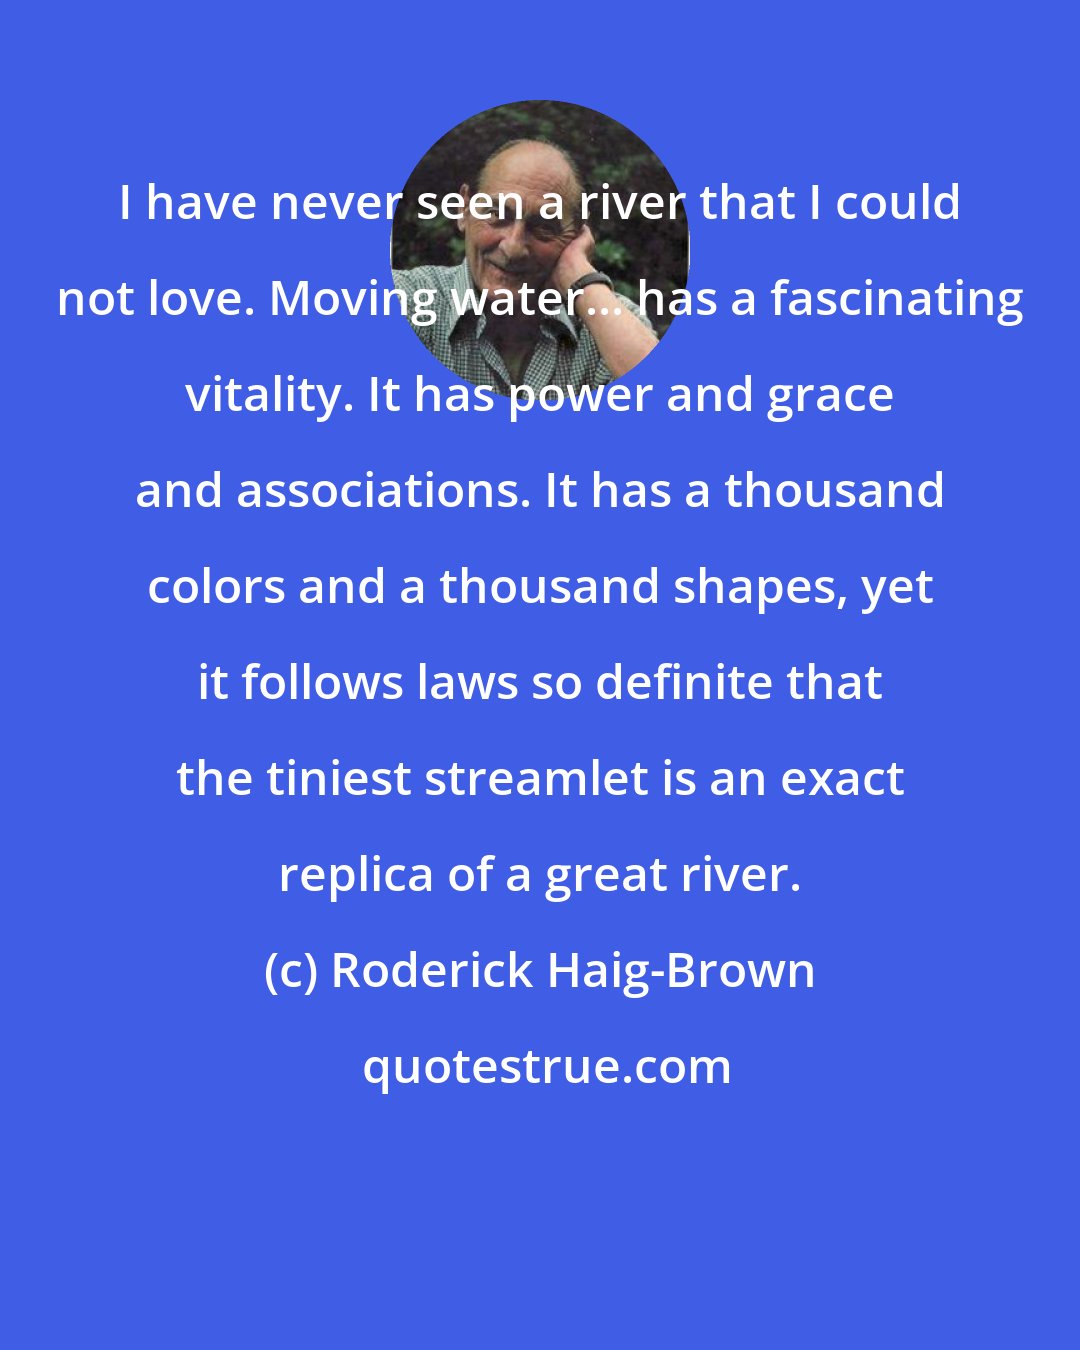 Roderick Haig-Brown: I have never seen a river that I could not love. Moving water... has a fascinating vitality. It has power and grace and associations. It has a thousand colors and a thousand shapes, yet it follows laws so definite that the tiniest streamlet is an exact replica of a great river.